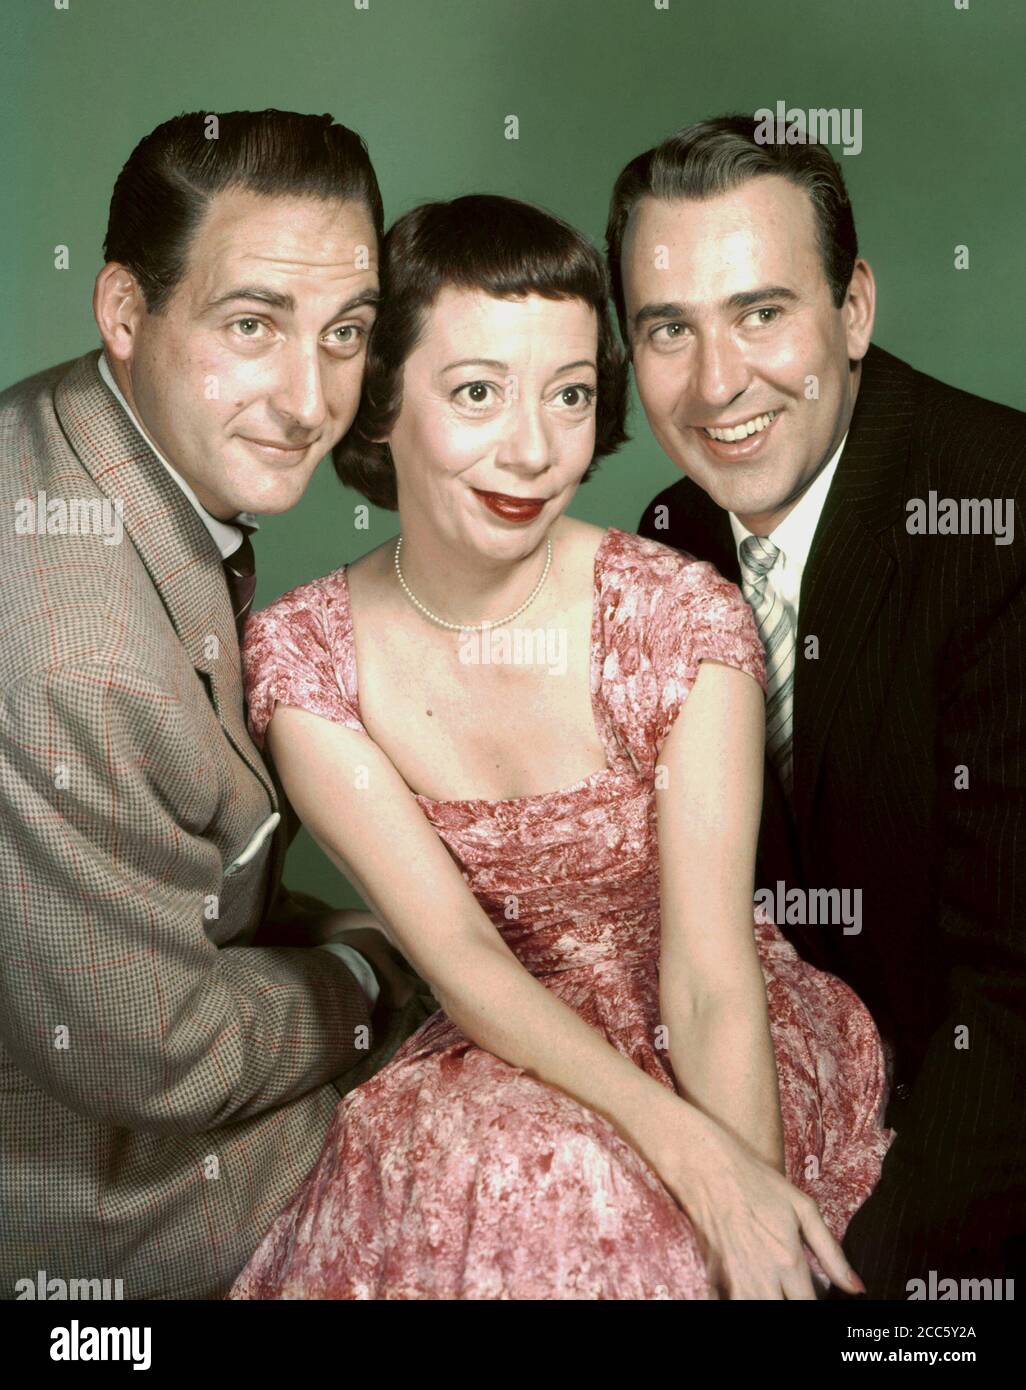 Sid Caesar, Imogene Coca, Carl Reiner star in 'Your Show Of Shows' circa 1954  File Reference # 34000-229THA Stock Photo